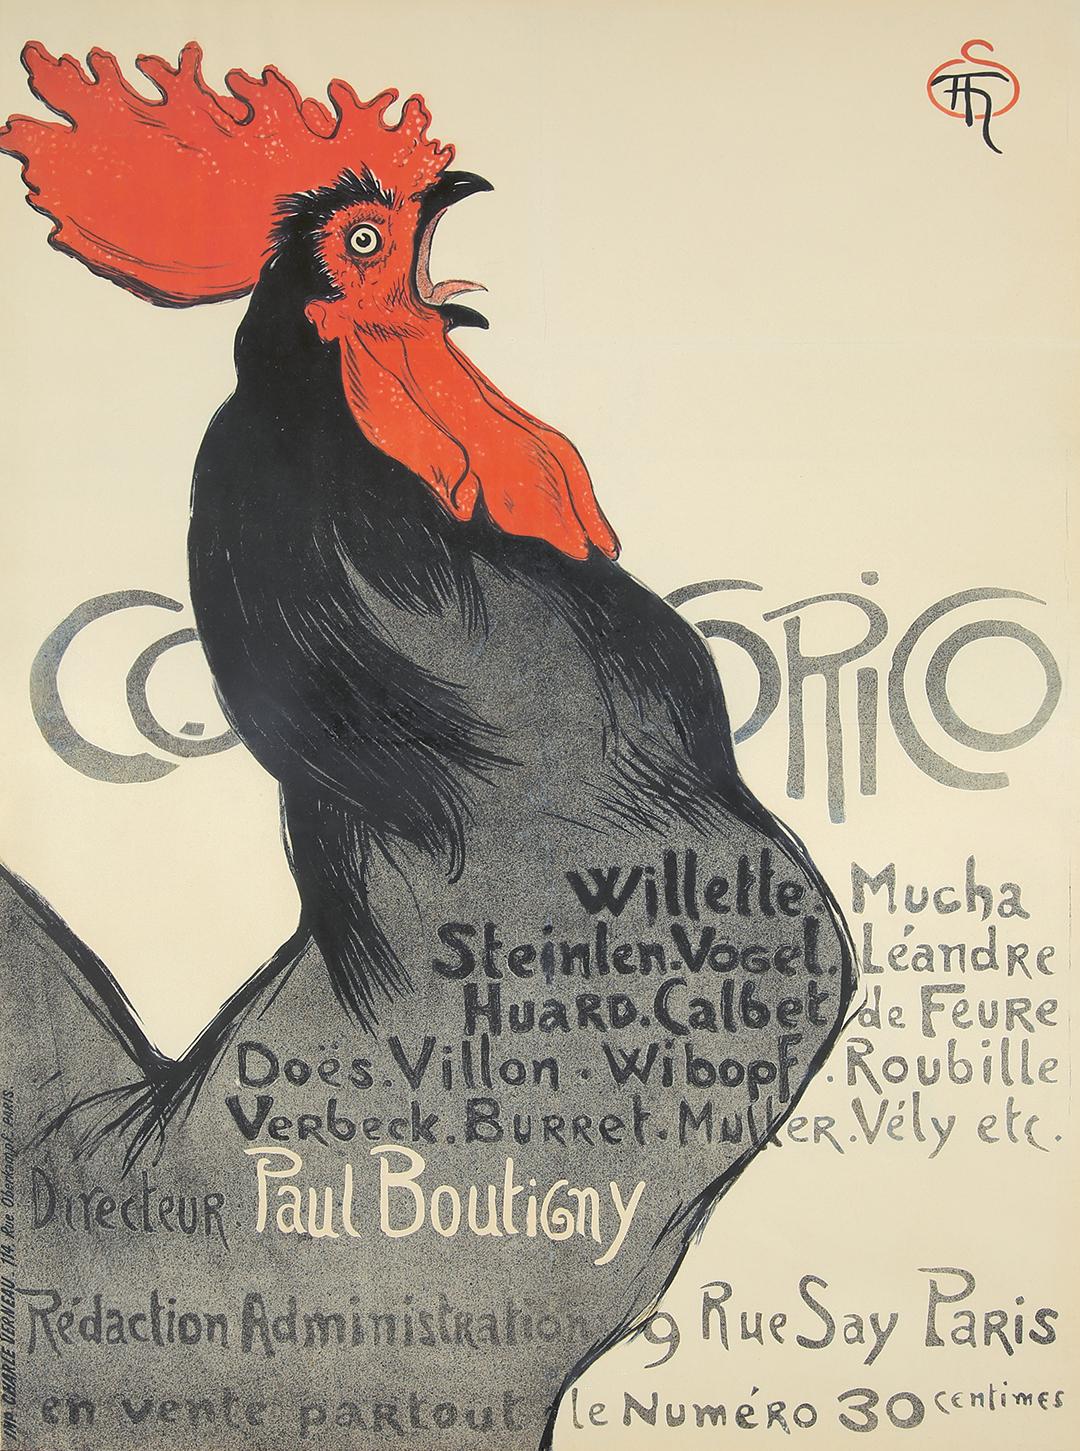 Cocorico. 1899.  Poster Auctions International, Inc.